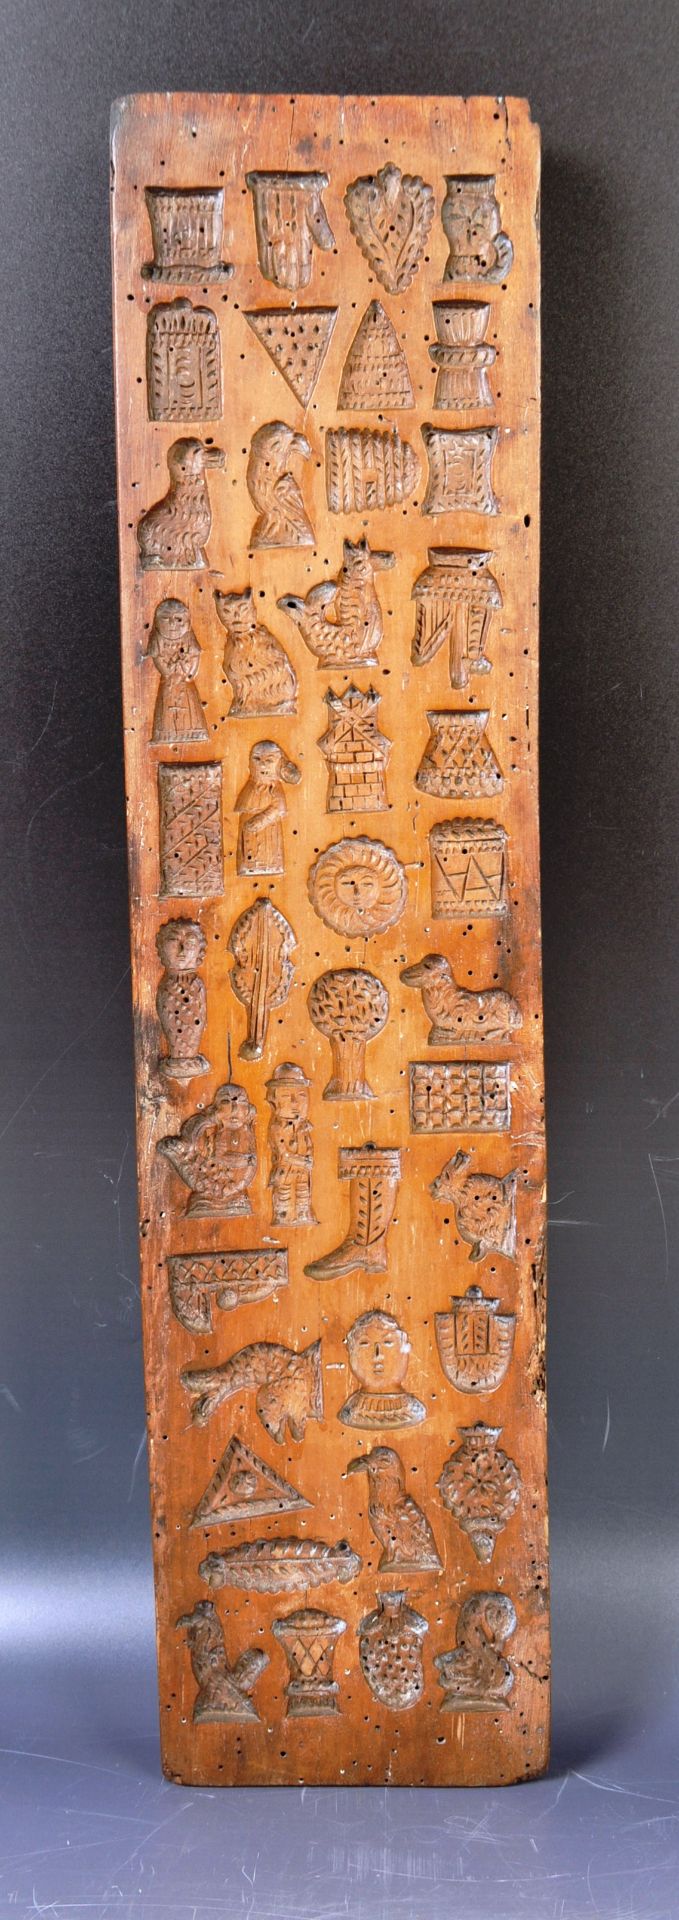 AN ANTIQUE 18TH CENTURY CARVED FRUITWOOD SWEET MOULD